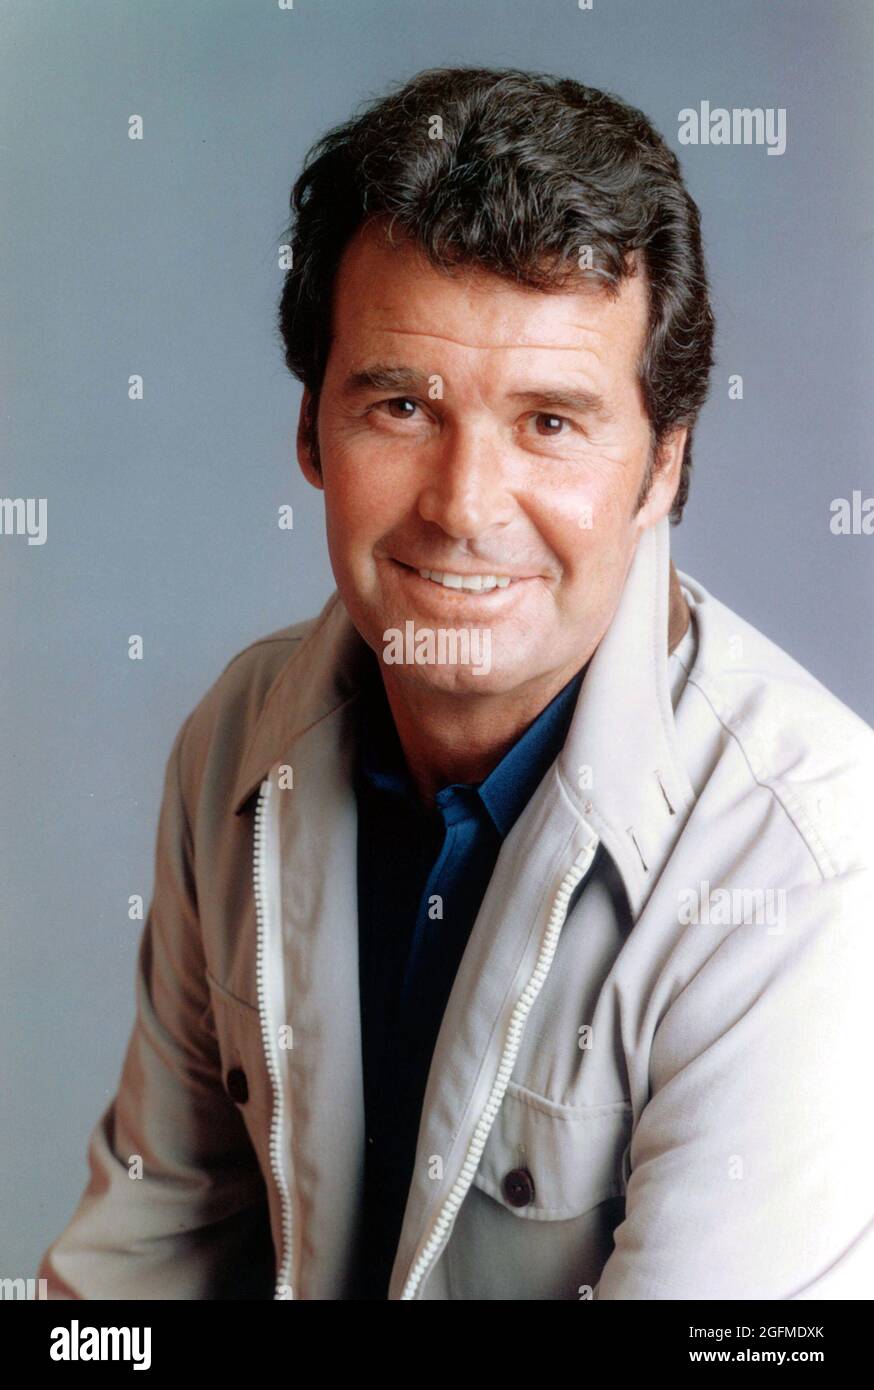 JAMES GARNER in THE ROCKFORD FILES (1974), directed by WILLIAM WIARD. Credit: ROY HUGGINS-PUBLIC ARTS PRODUCTIONS / Album Stock Photo